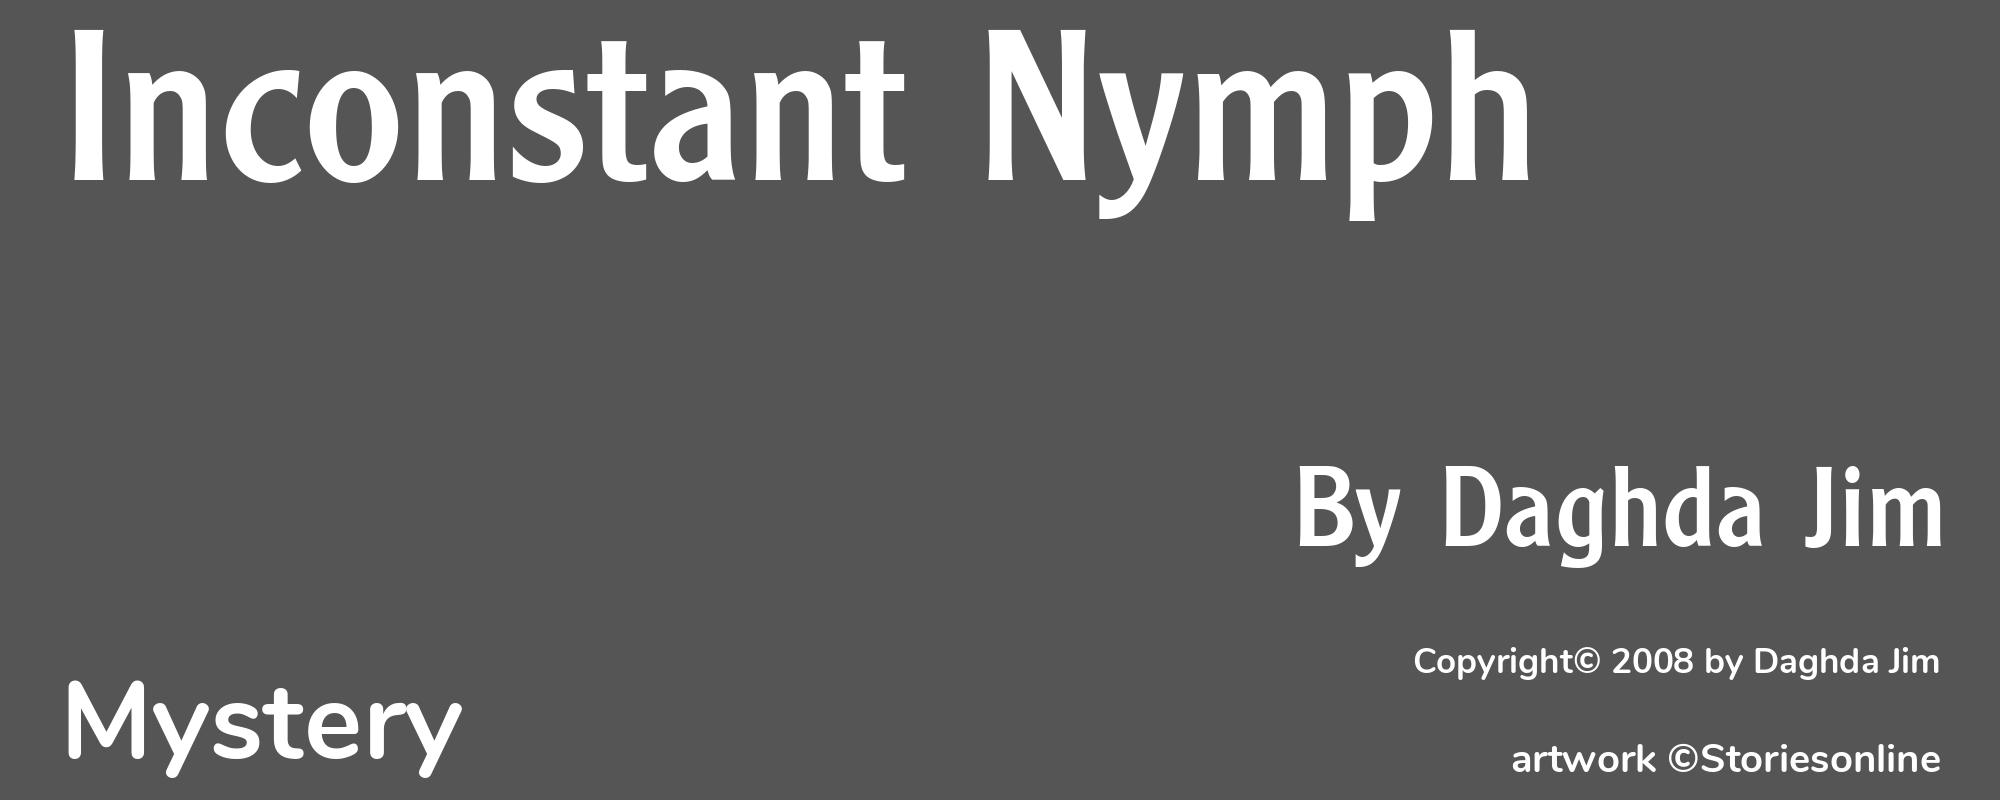 Inconstant Nymph - Cover